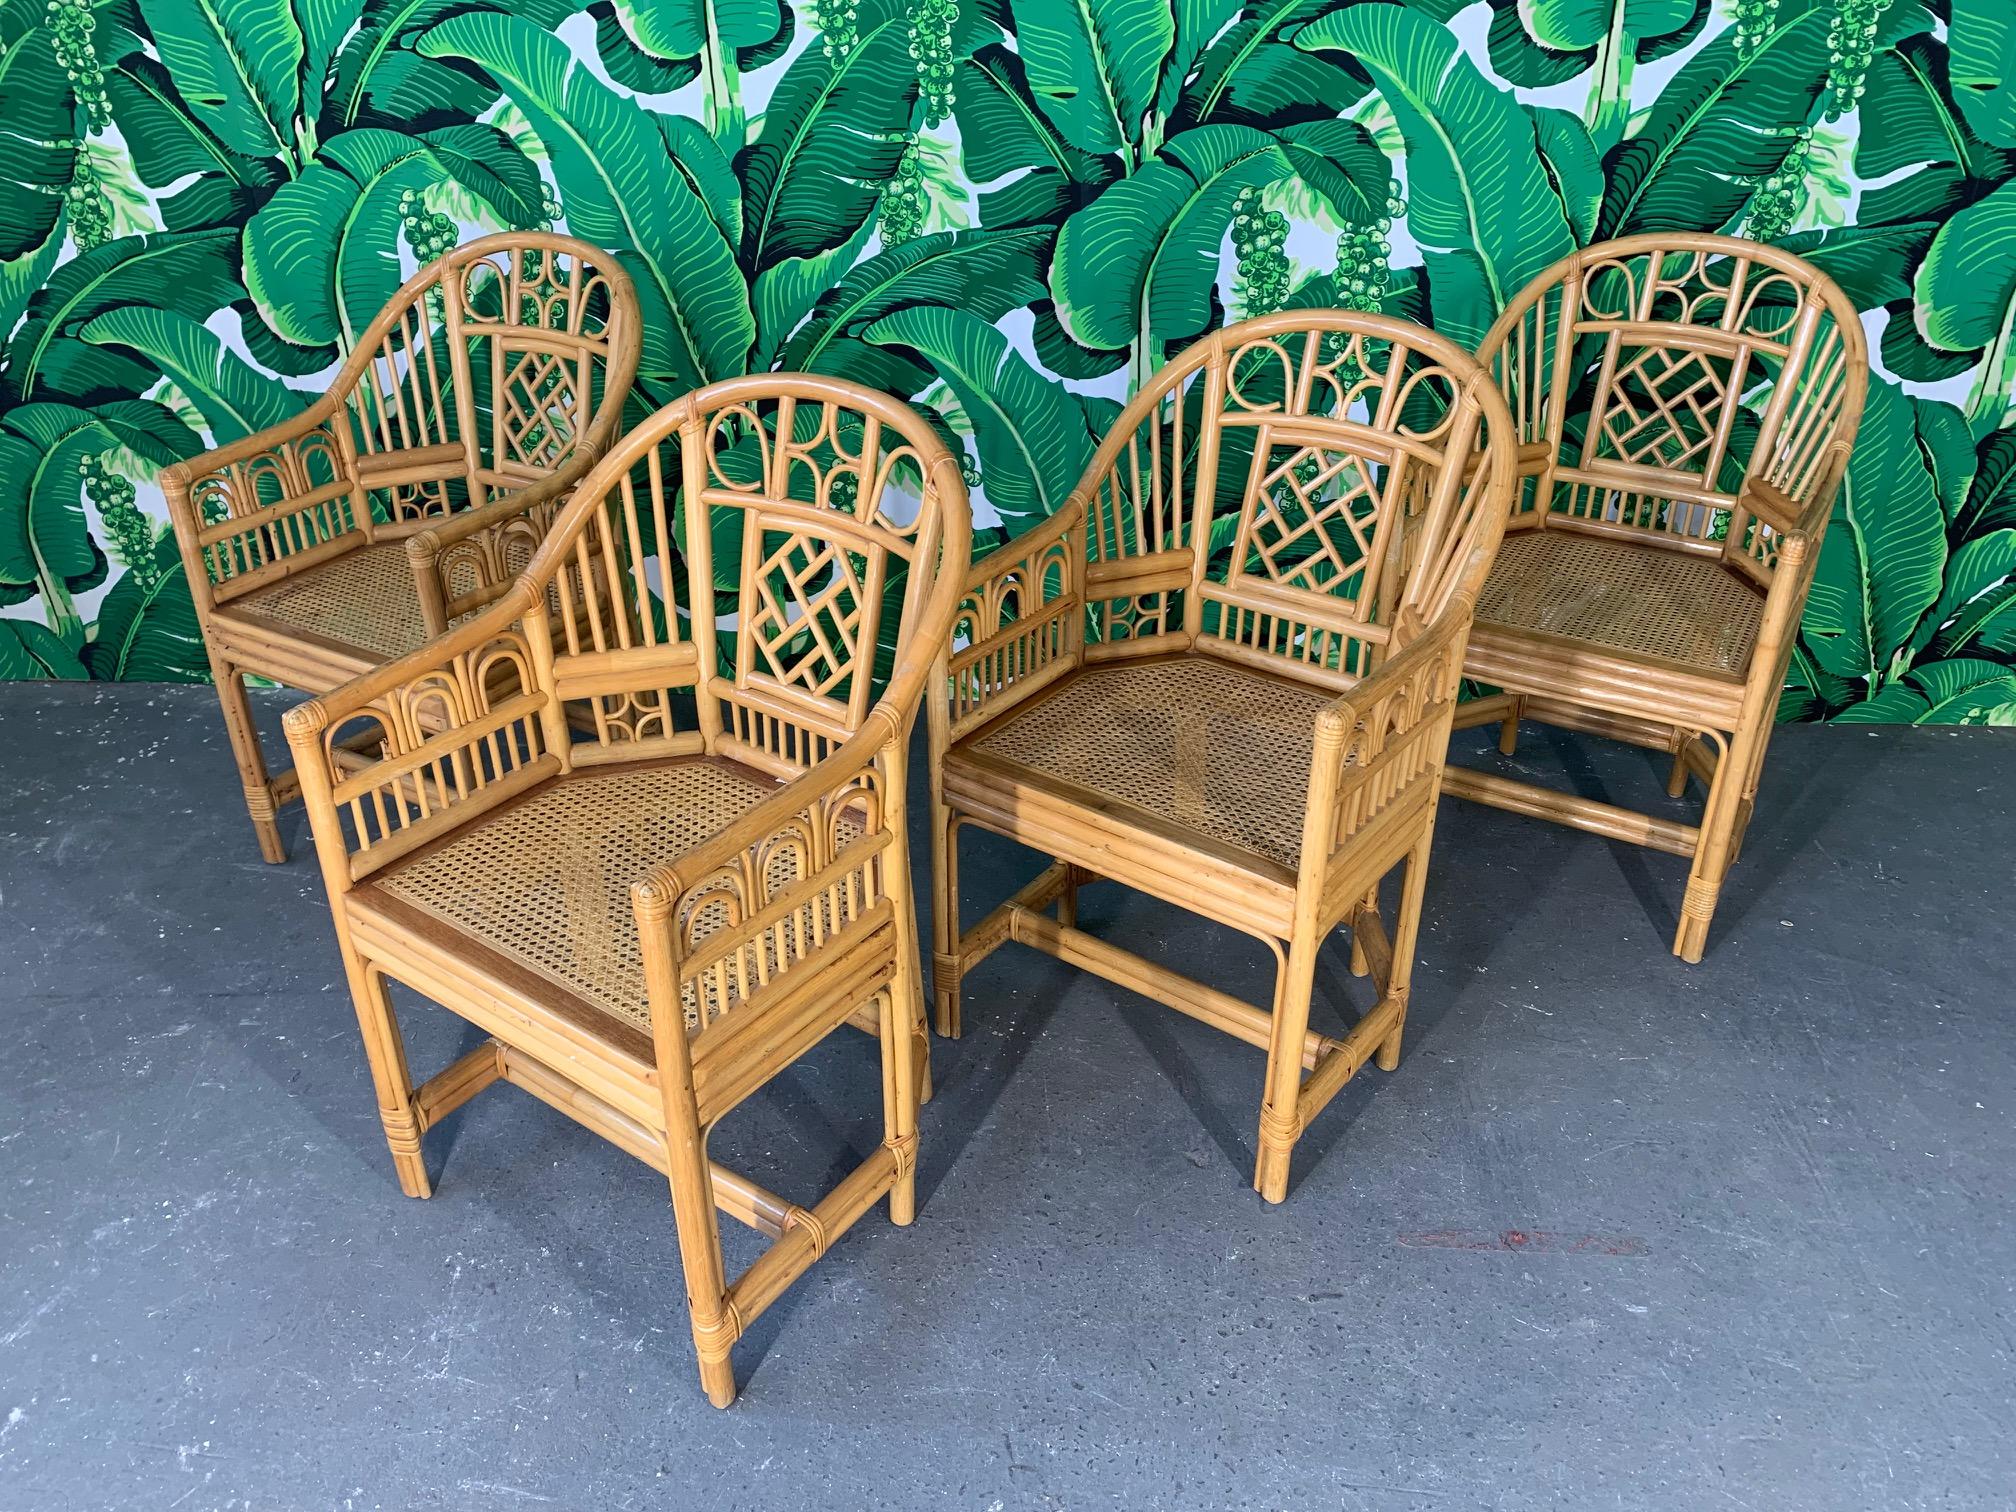 Set of 4 Brighton Pavilion style rattan dining armchairs feature bamboo construction, cane seats, and chinoiserie style detailing. Very good condition.